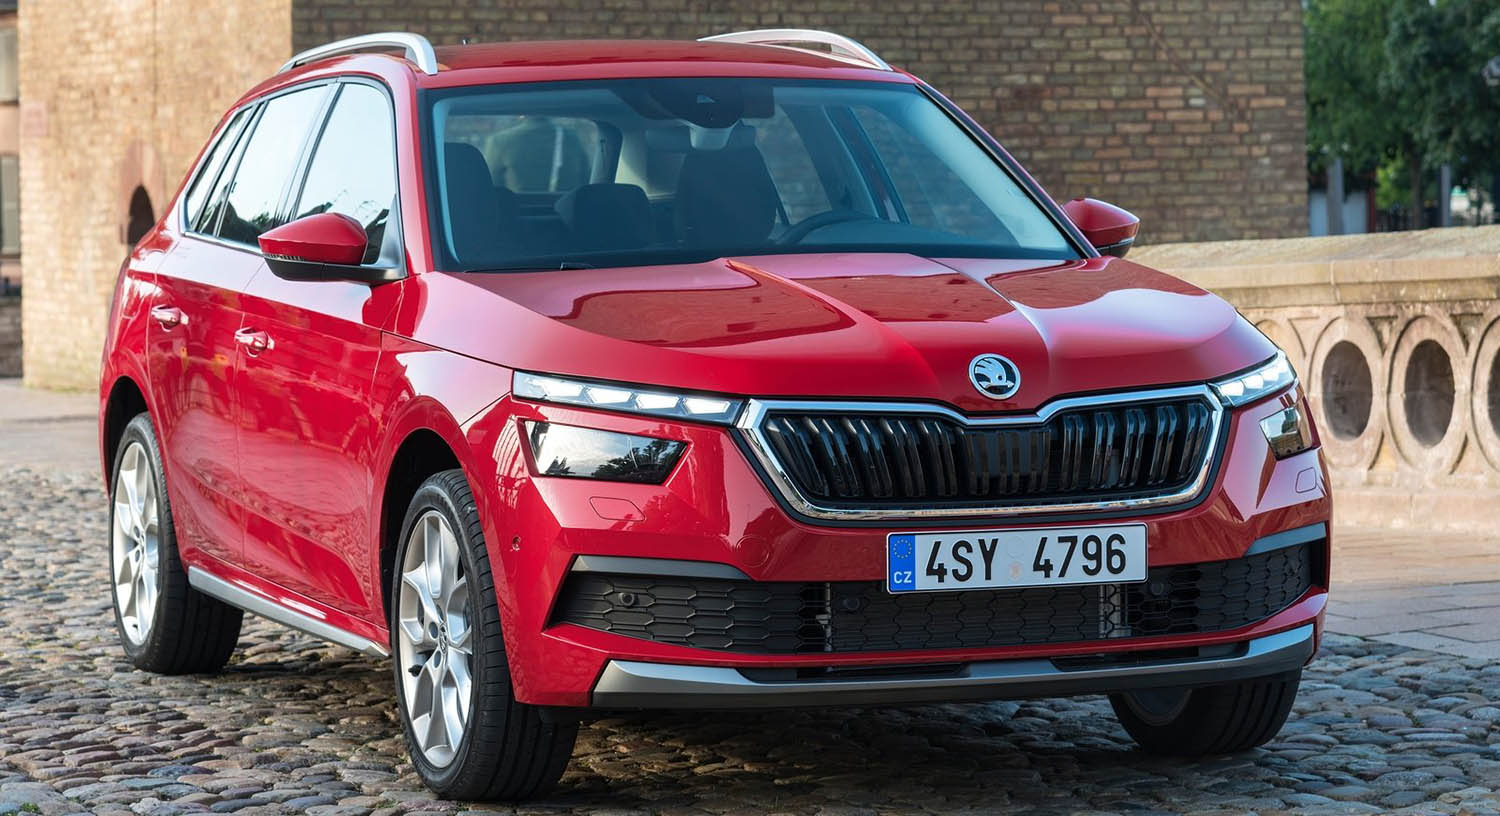 Skoda Kamiq 2021 – A Compact SUV With Powerful Features